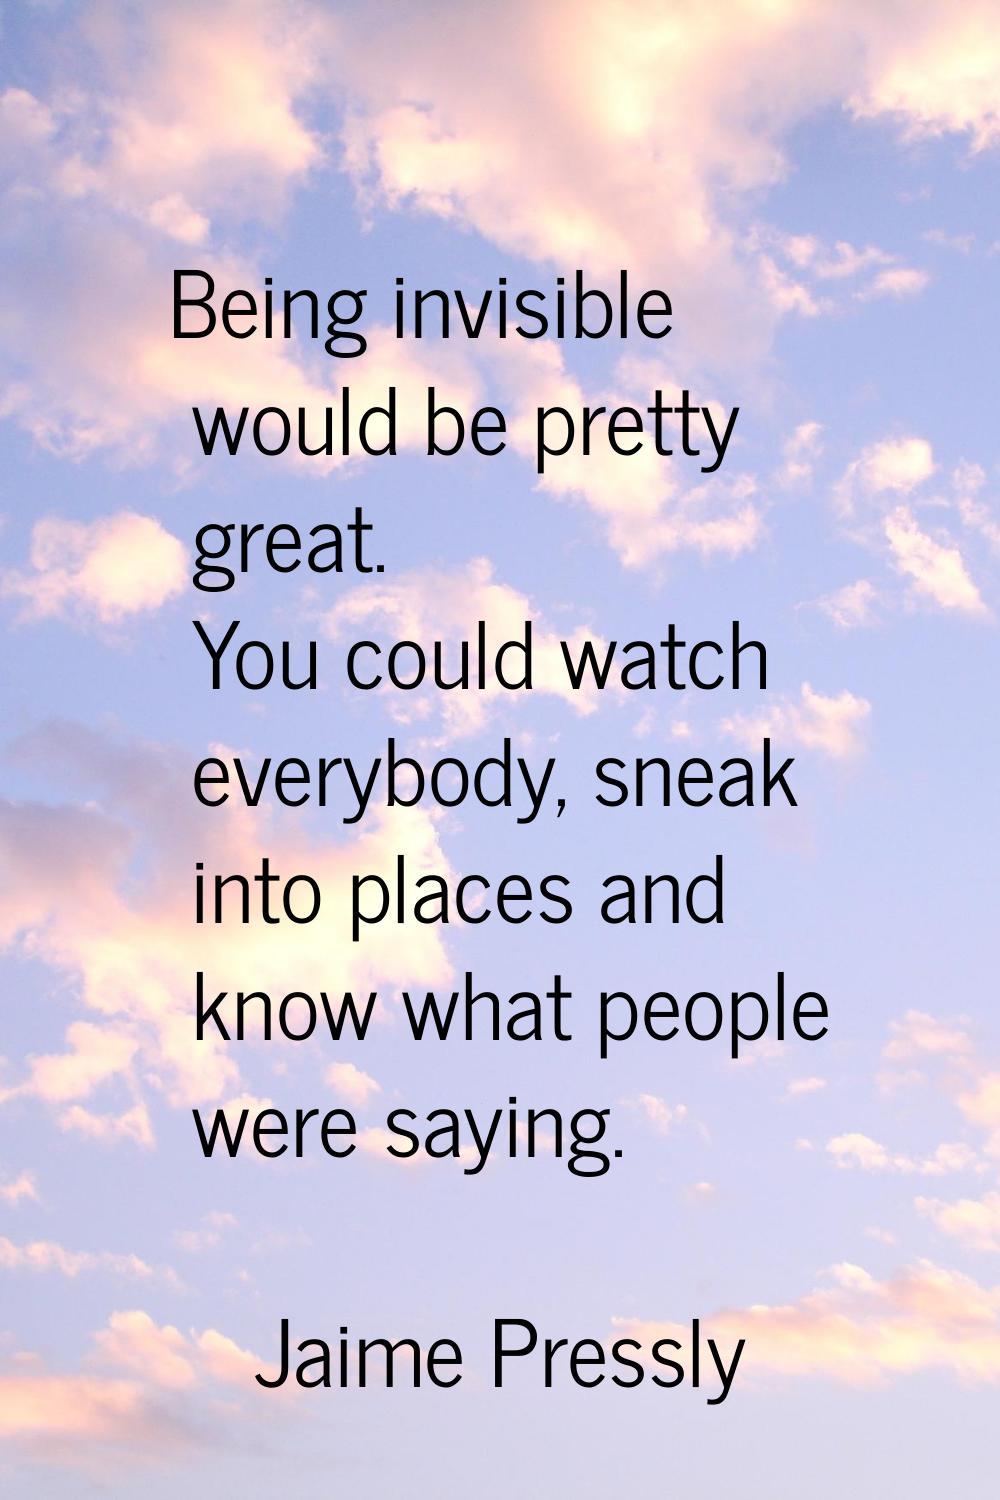 Being invisible would be pretty great. You could watch everybody, sneak into places and know what p